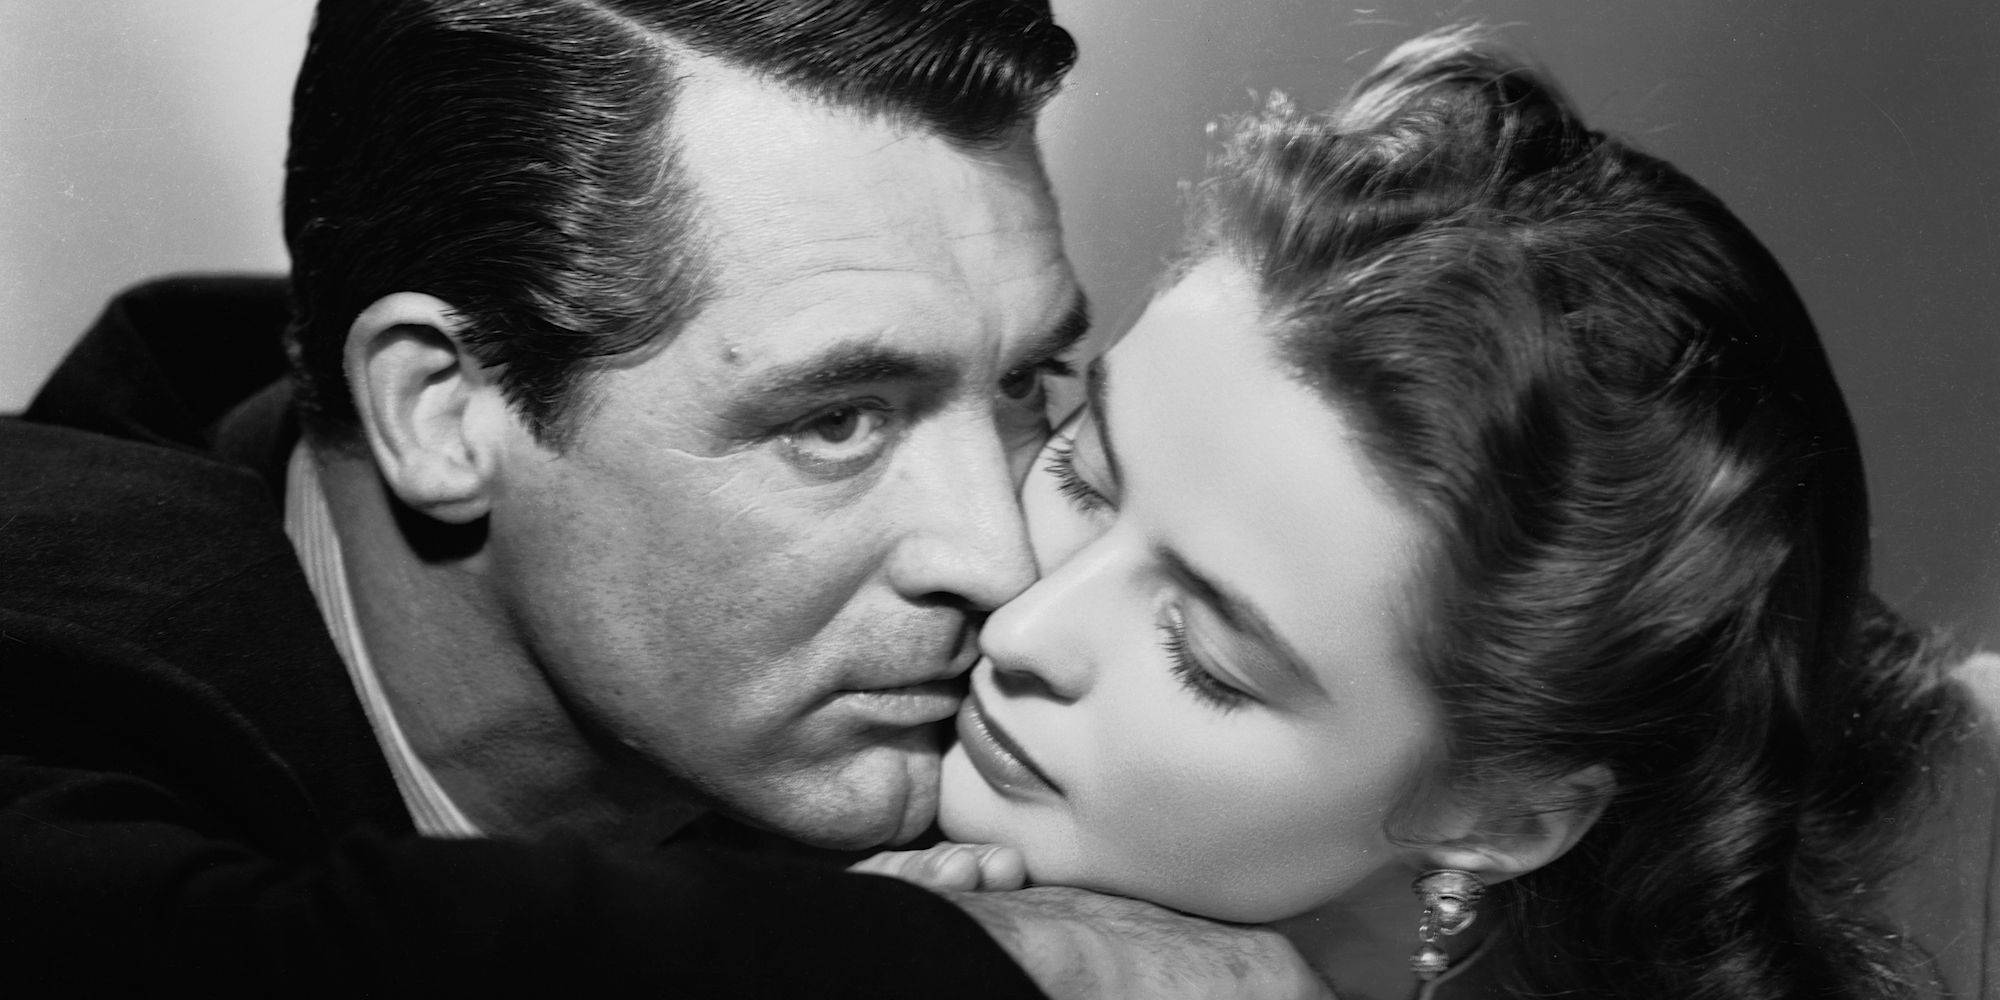 Cary Grant and Ingrid Bergman relax together in 'Notorious'